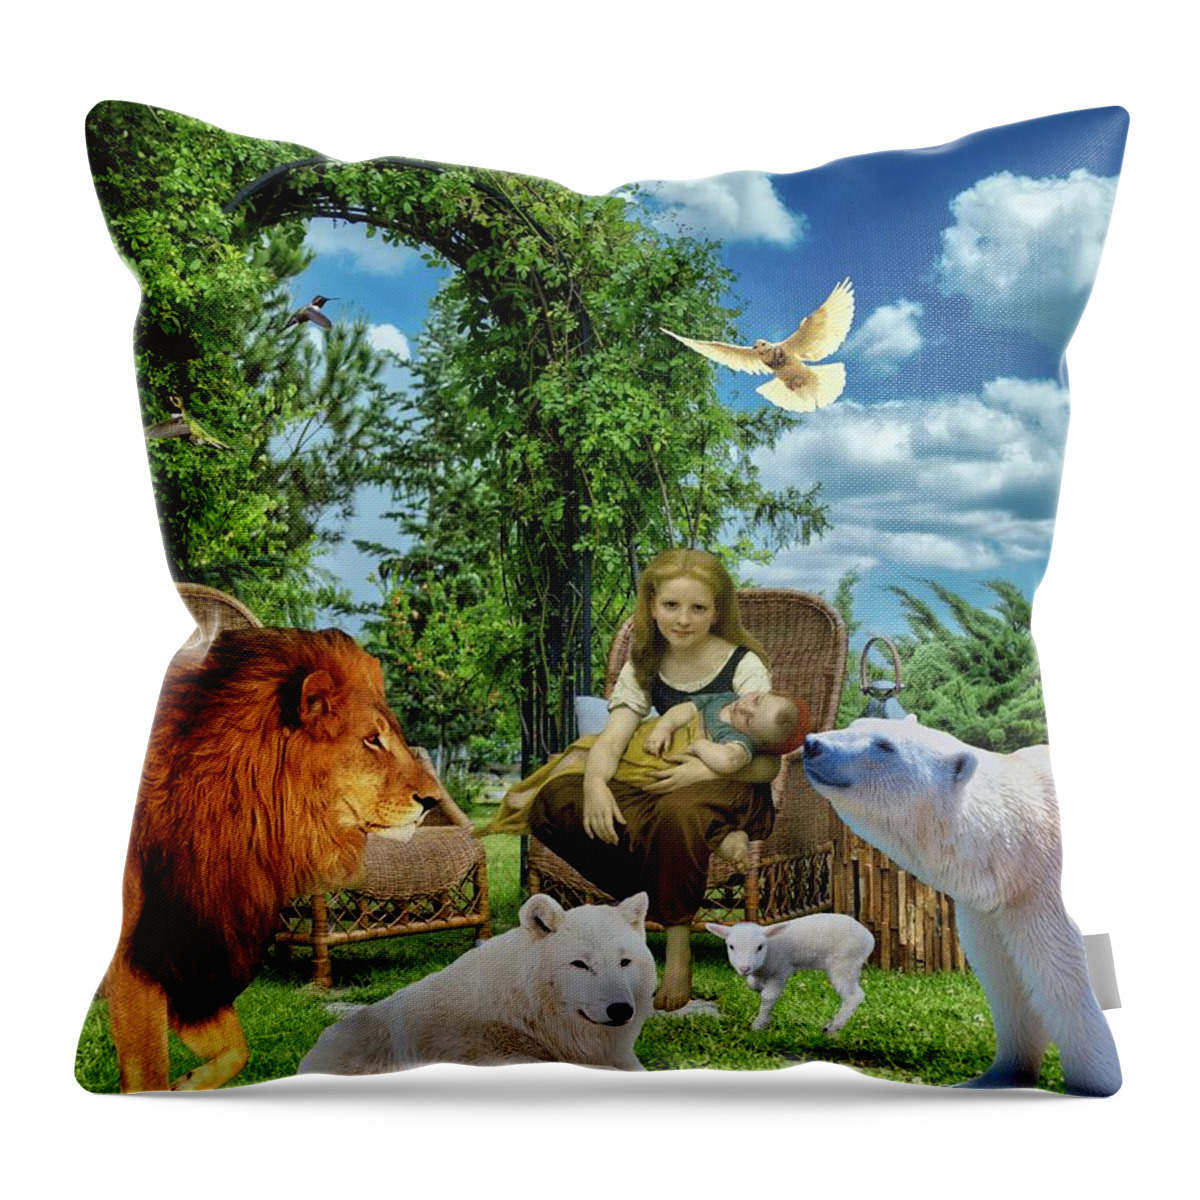 Lion Throw Pillow featuring the digital art The Millennium by Norman Brule